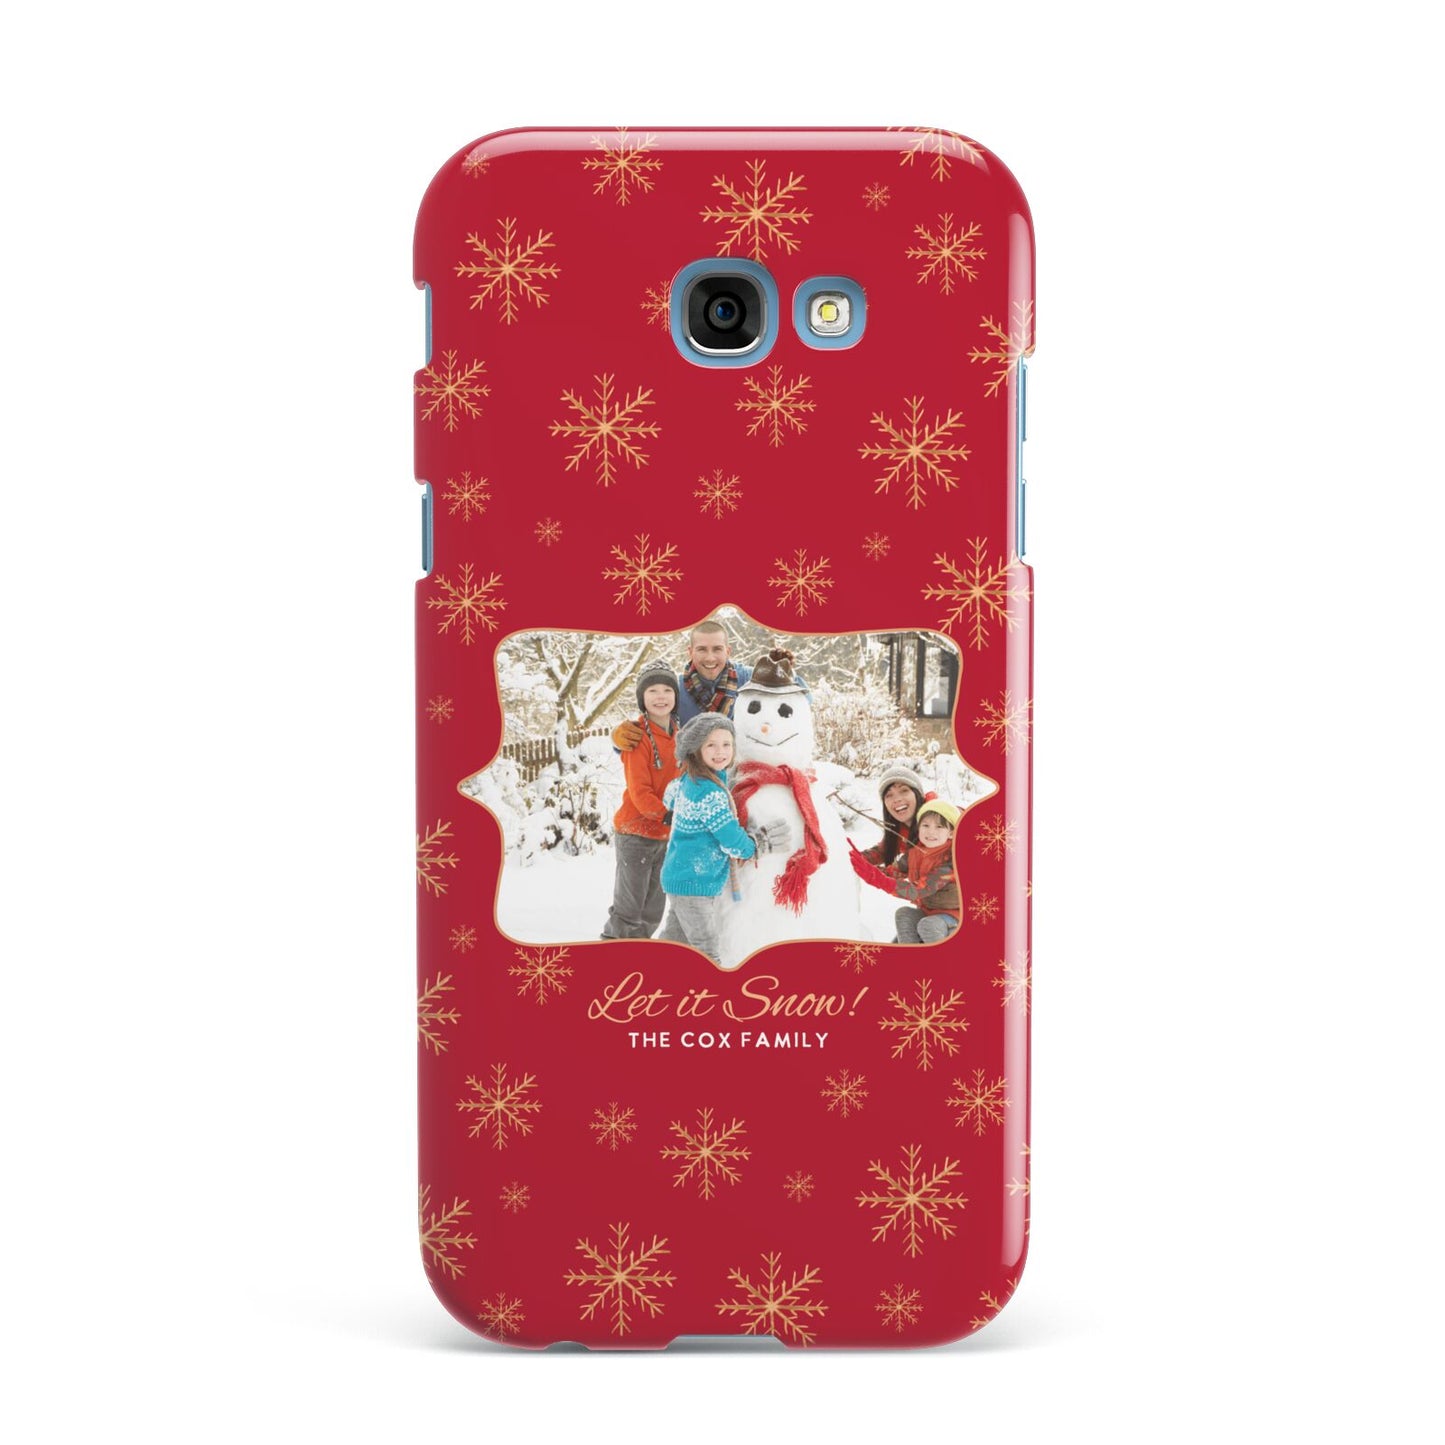 Let it Snow Christmas Photo Upload Samsung Galaxy A7 2017 Case